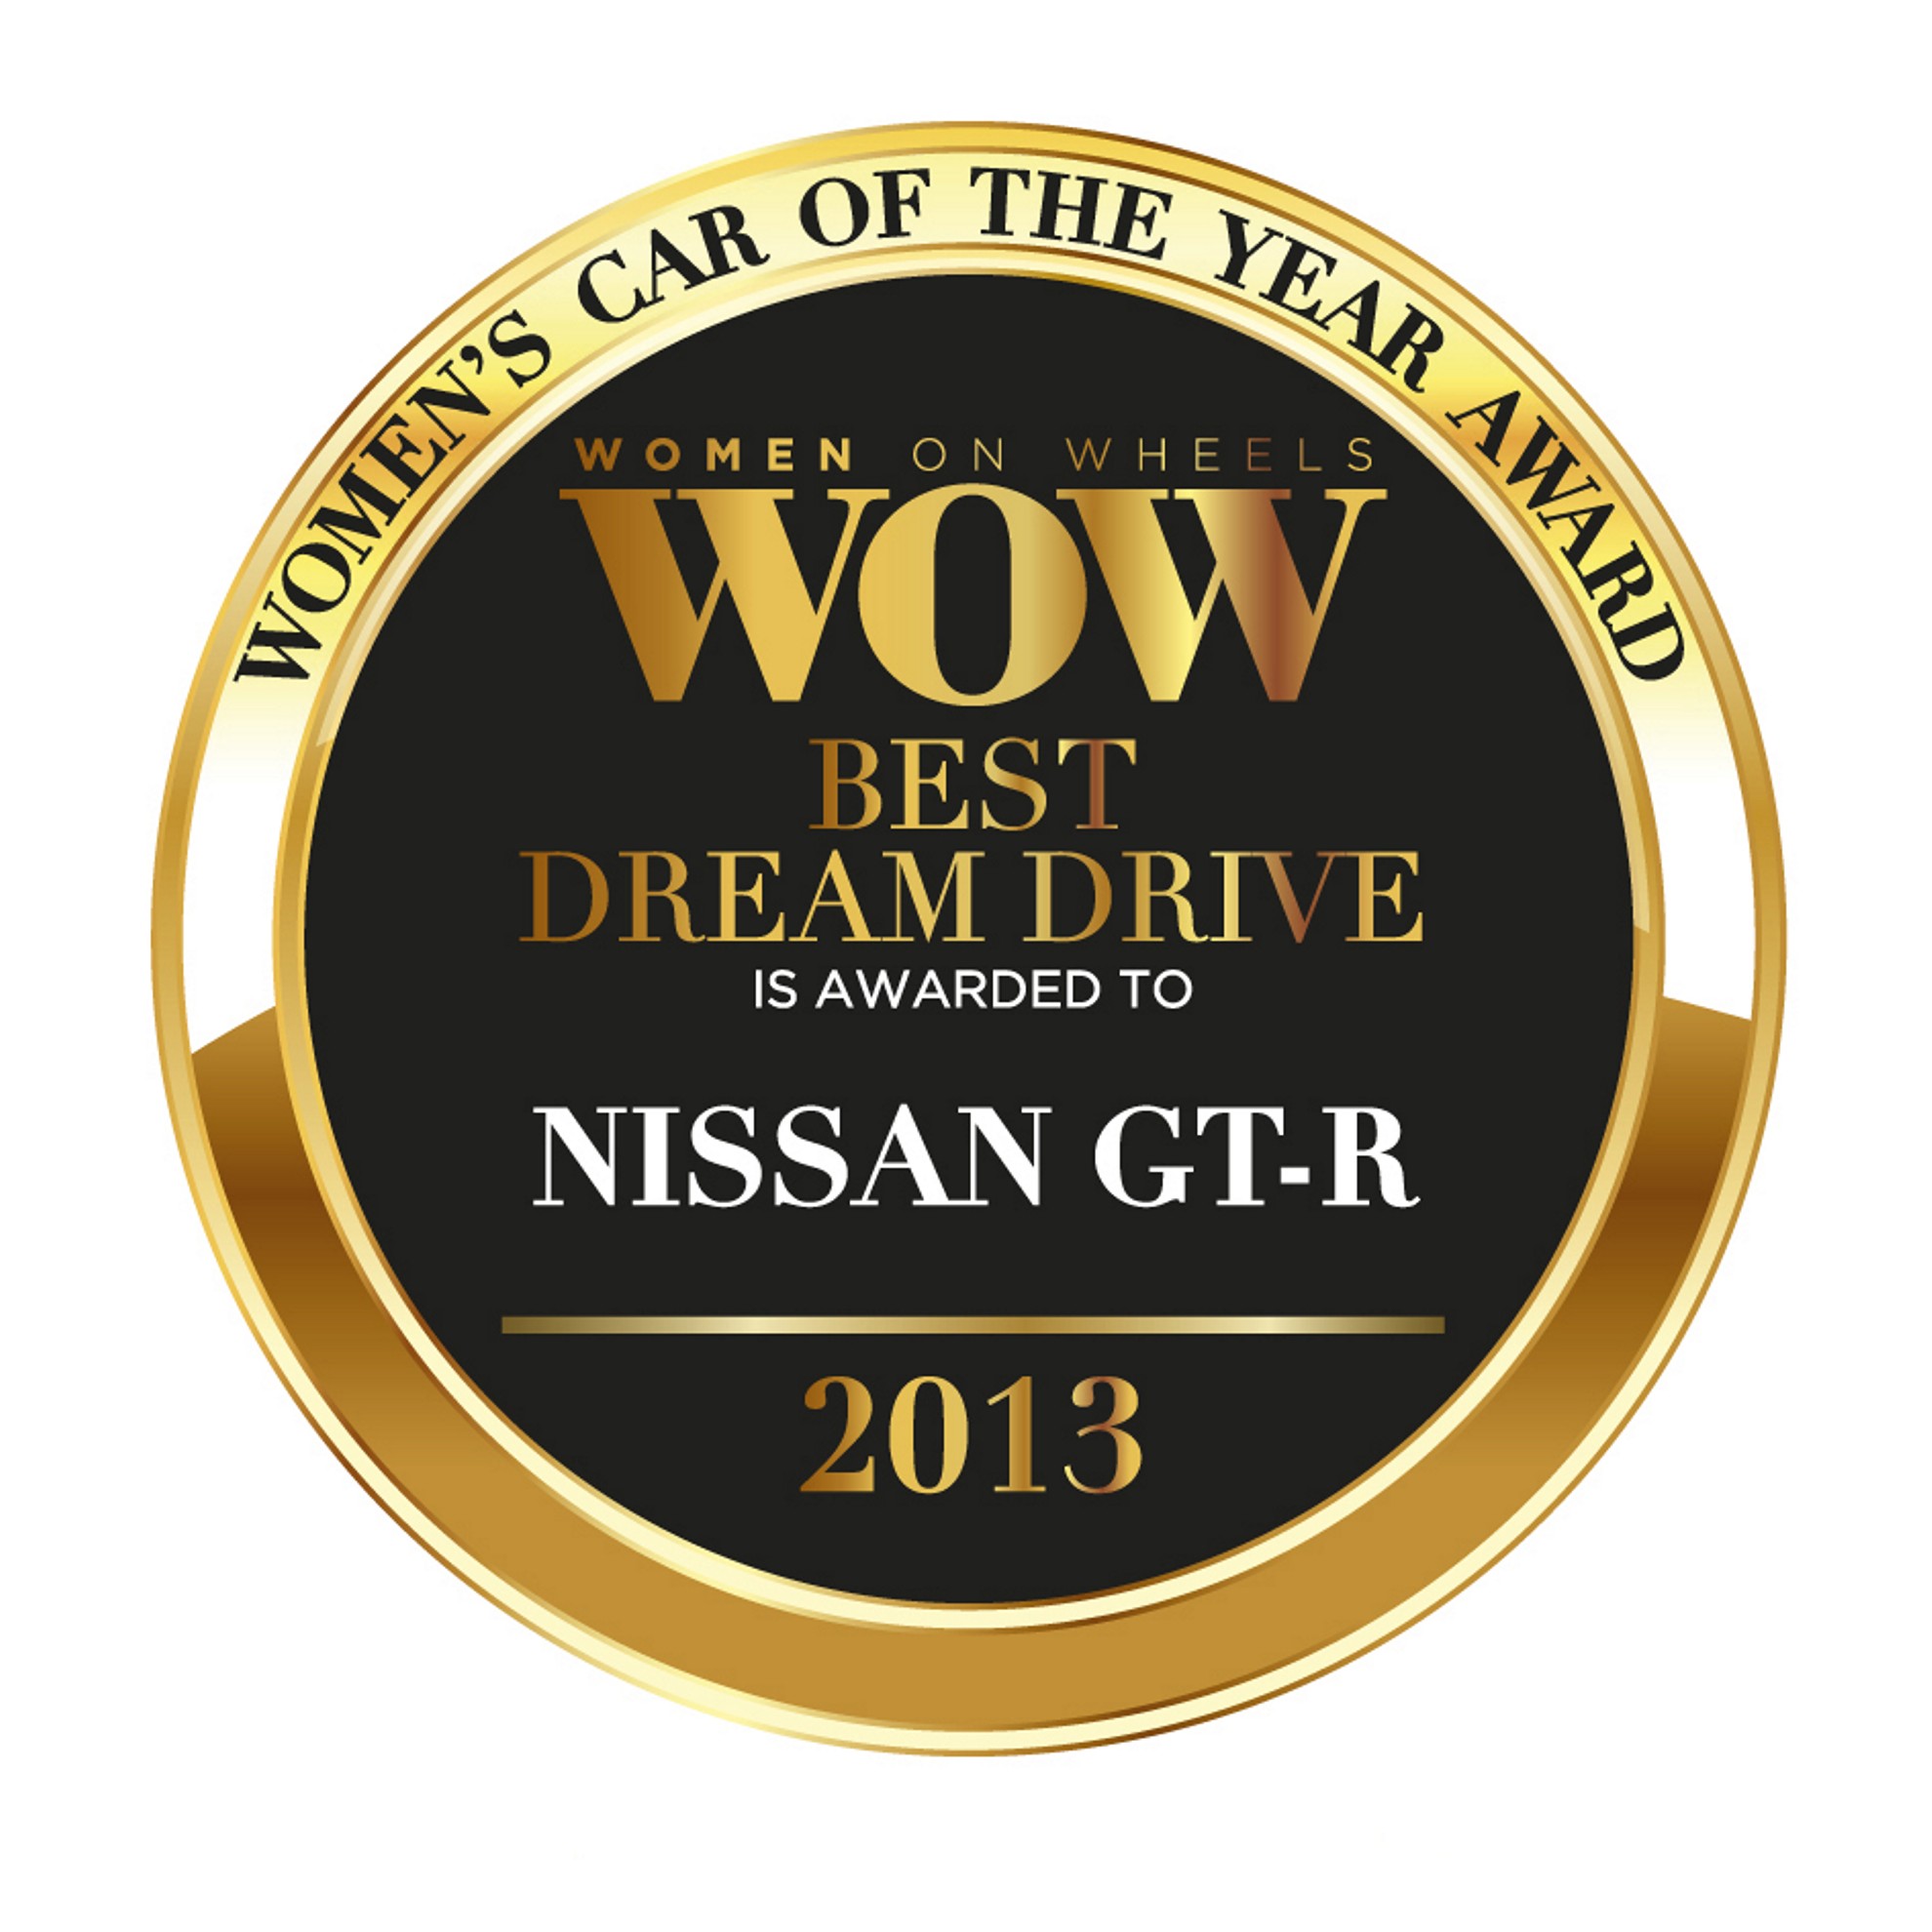 Women’s Car of the Year 2013 – Nissan GT-R